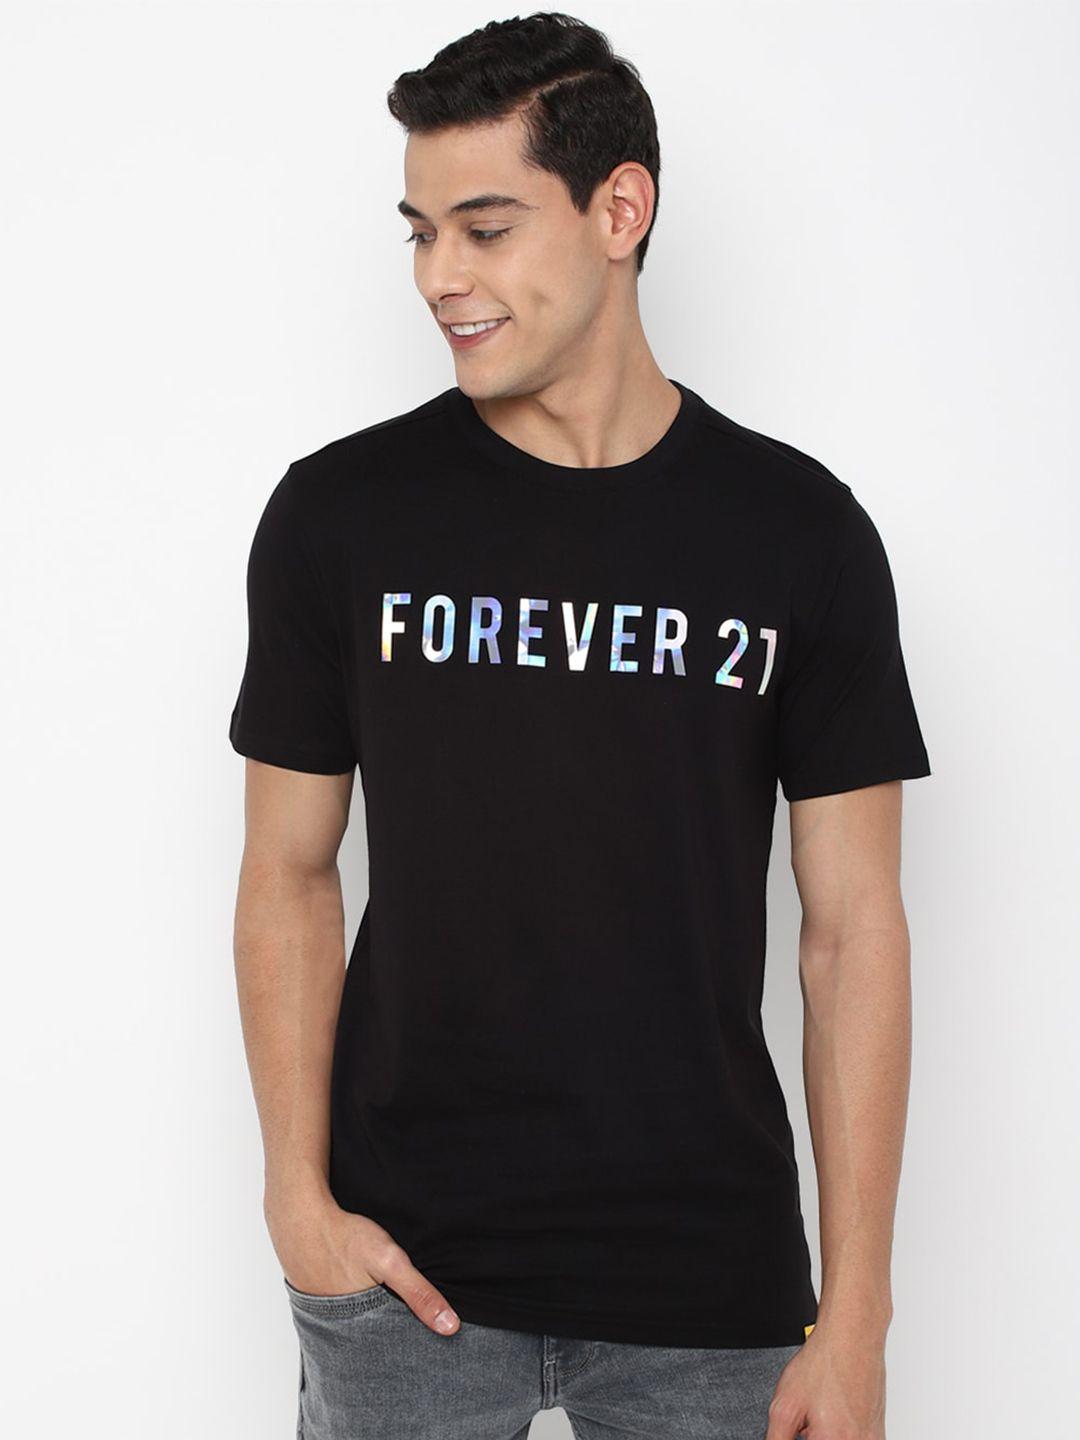 FOREVER 21 Men Black & White Typography Printed Pure Cotton T-shirt